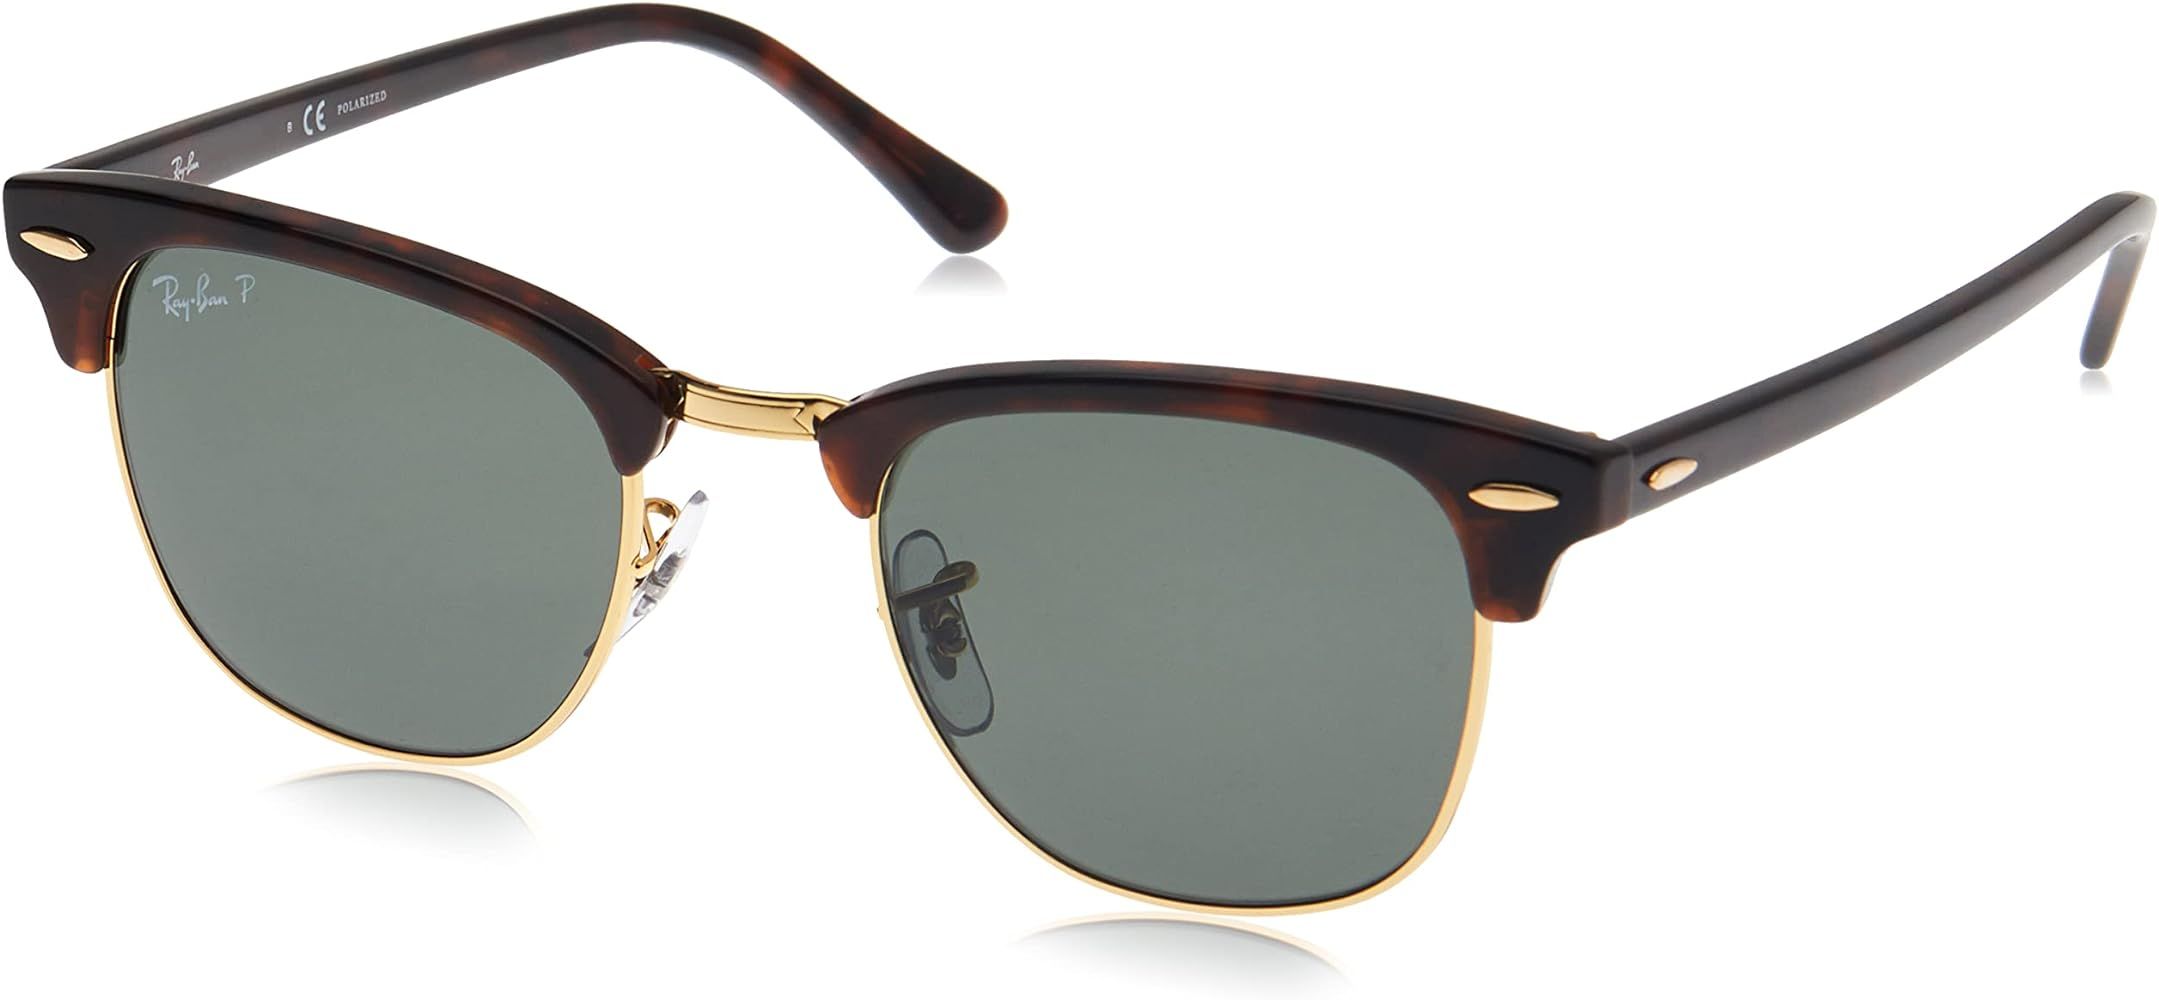 Ray-Ban Rb3016 Clubmaster Square Sunglasses | Amazon (US)